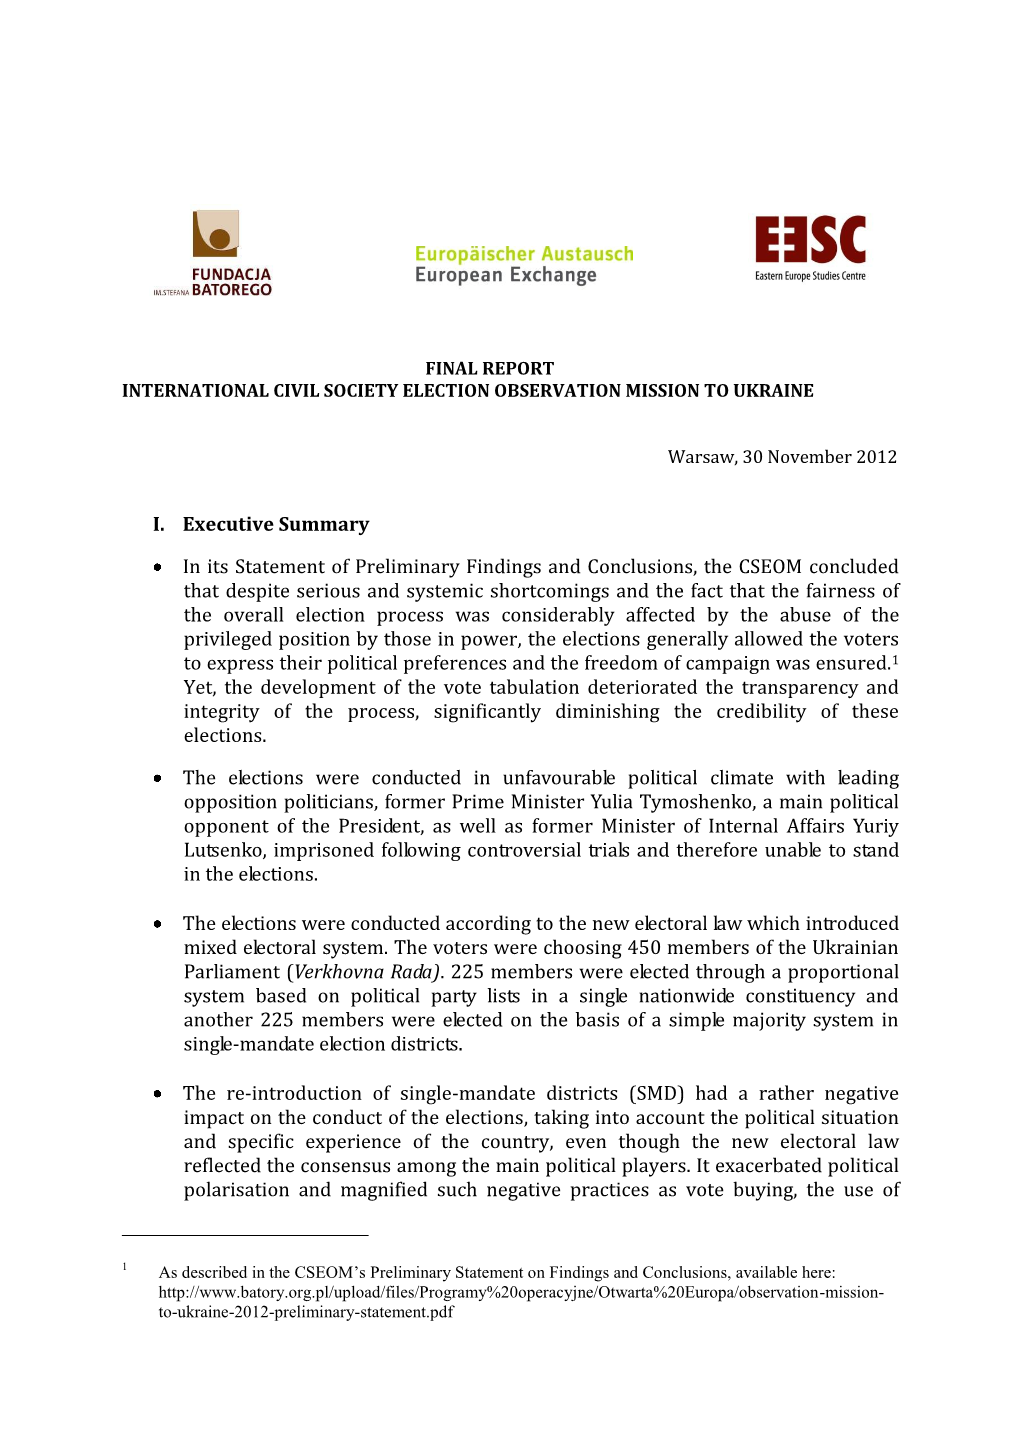 I. Executive Summary in Its Statement of Preliminary Findings And